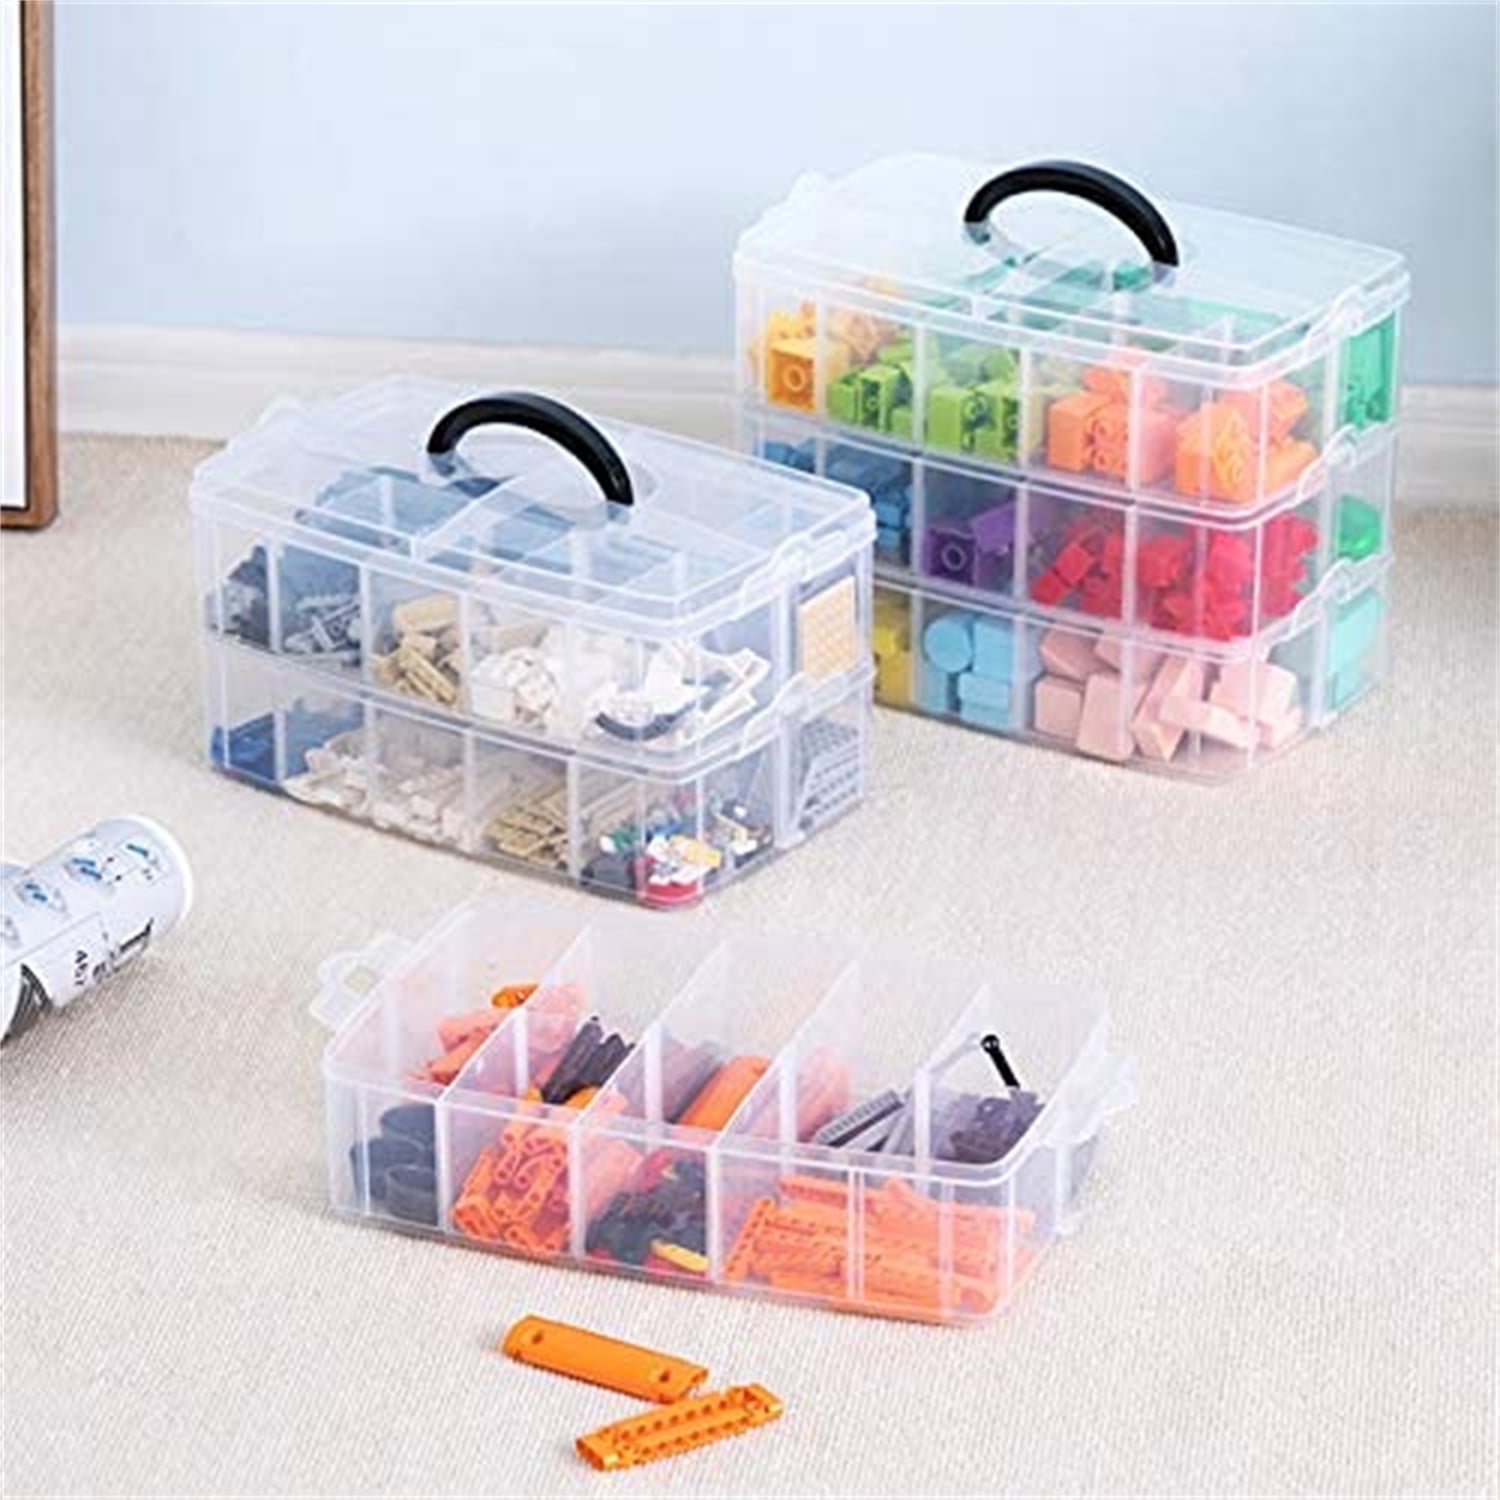  Peohud Set of 3 Lidded Storage Bins, Stackable Storage  Containers for Organizing, Plastic Organizer Box for Home RV Classroom  Office